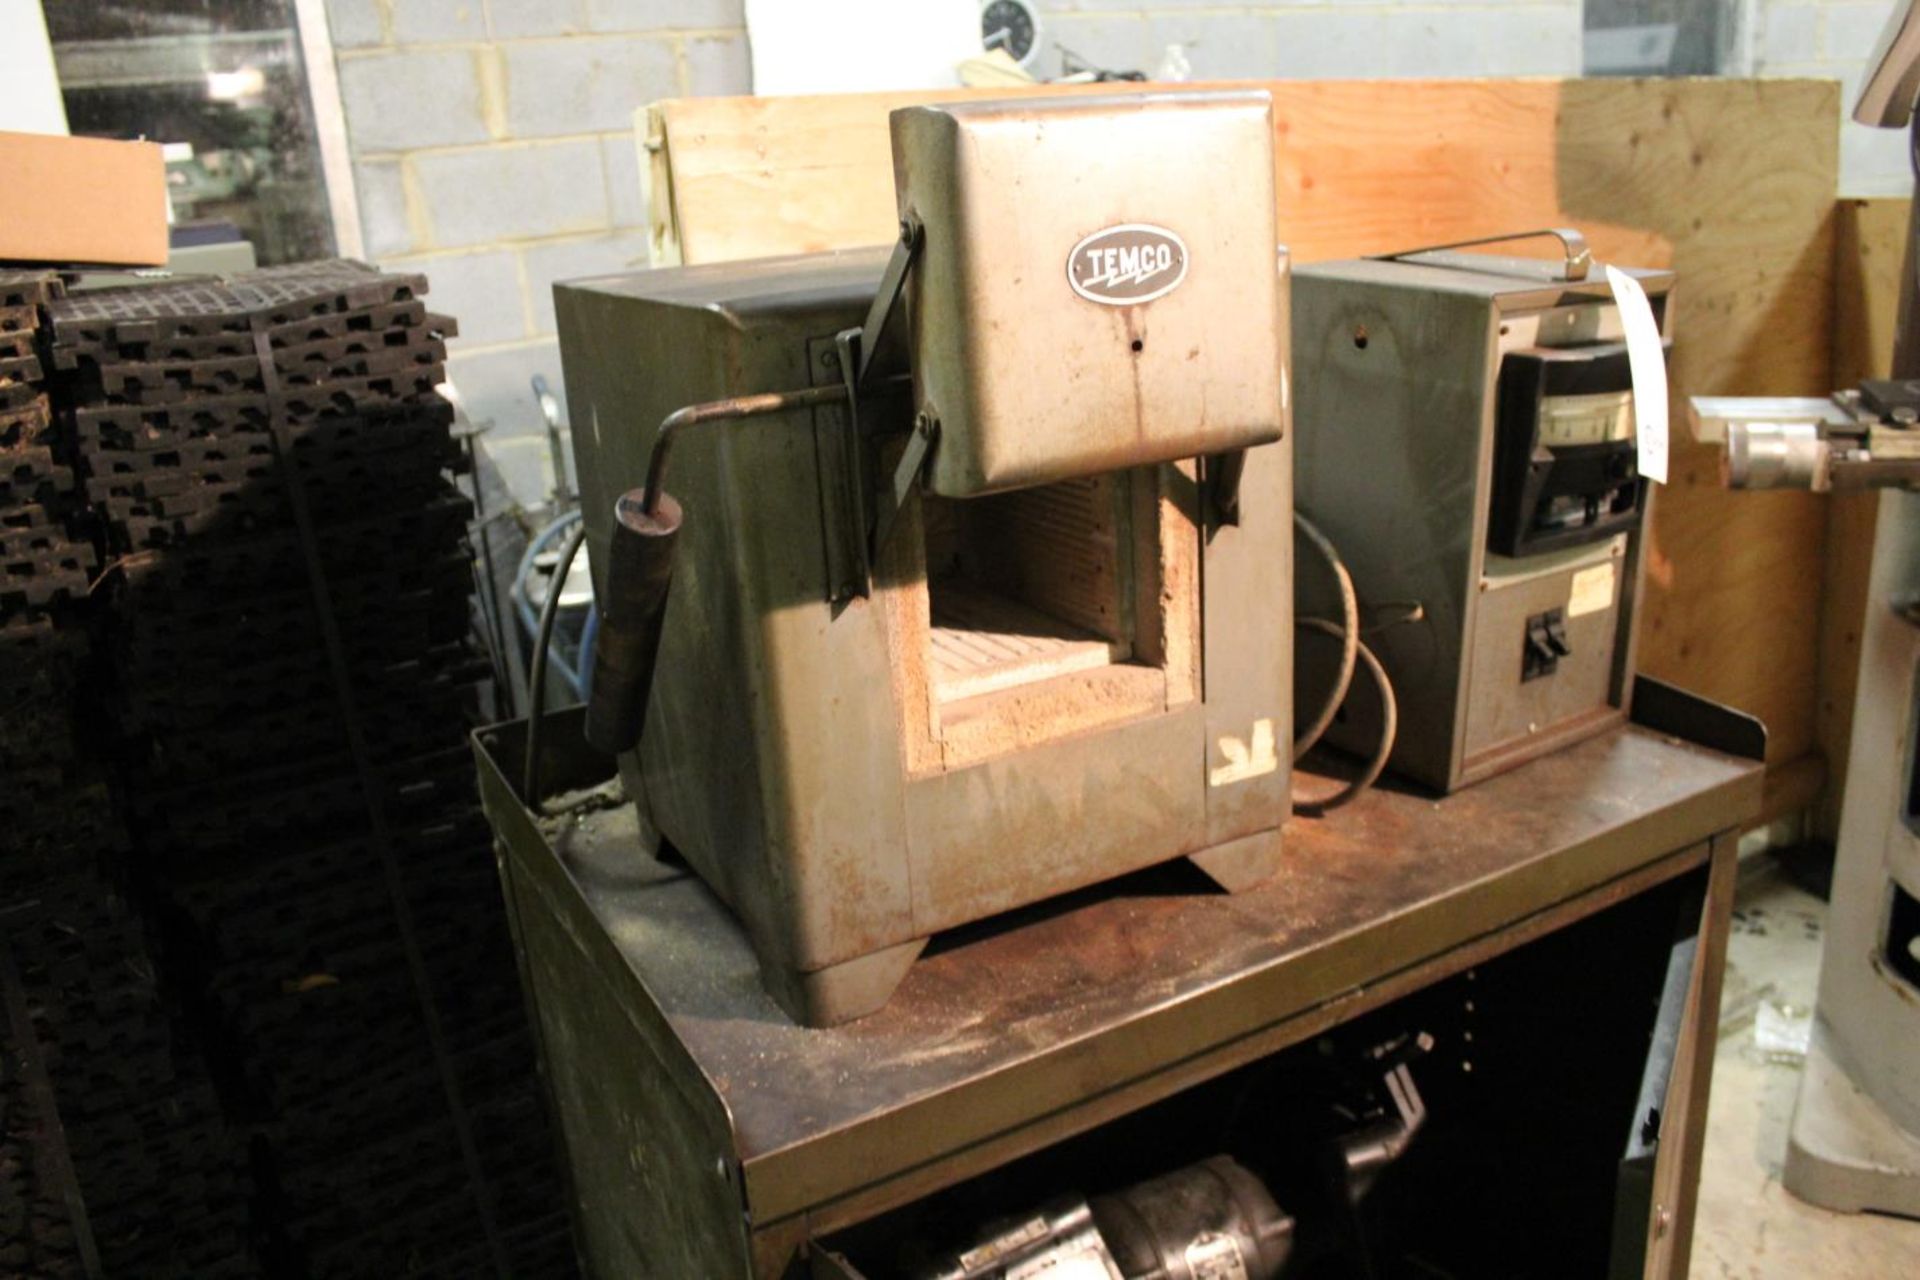 Temco 1620 Heat Treating Furnace With Cabinet, Stanley Grinder